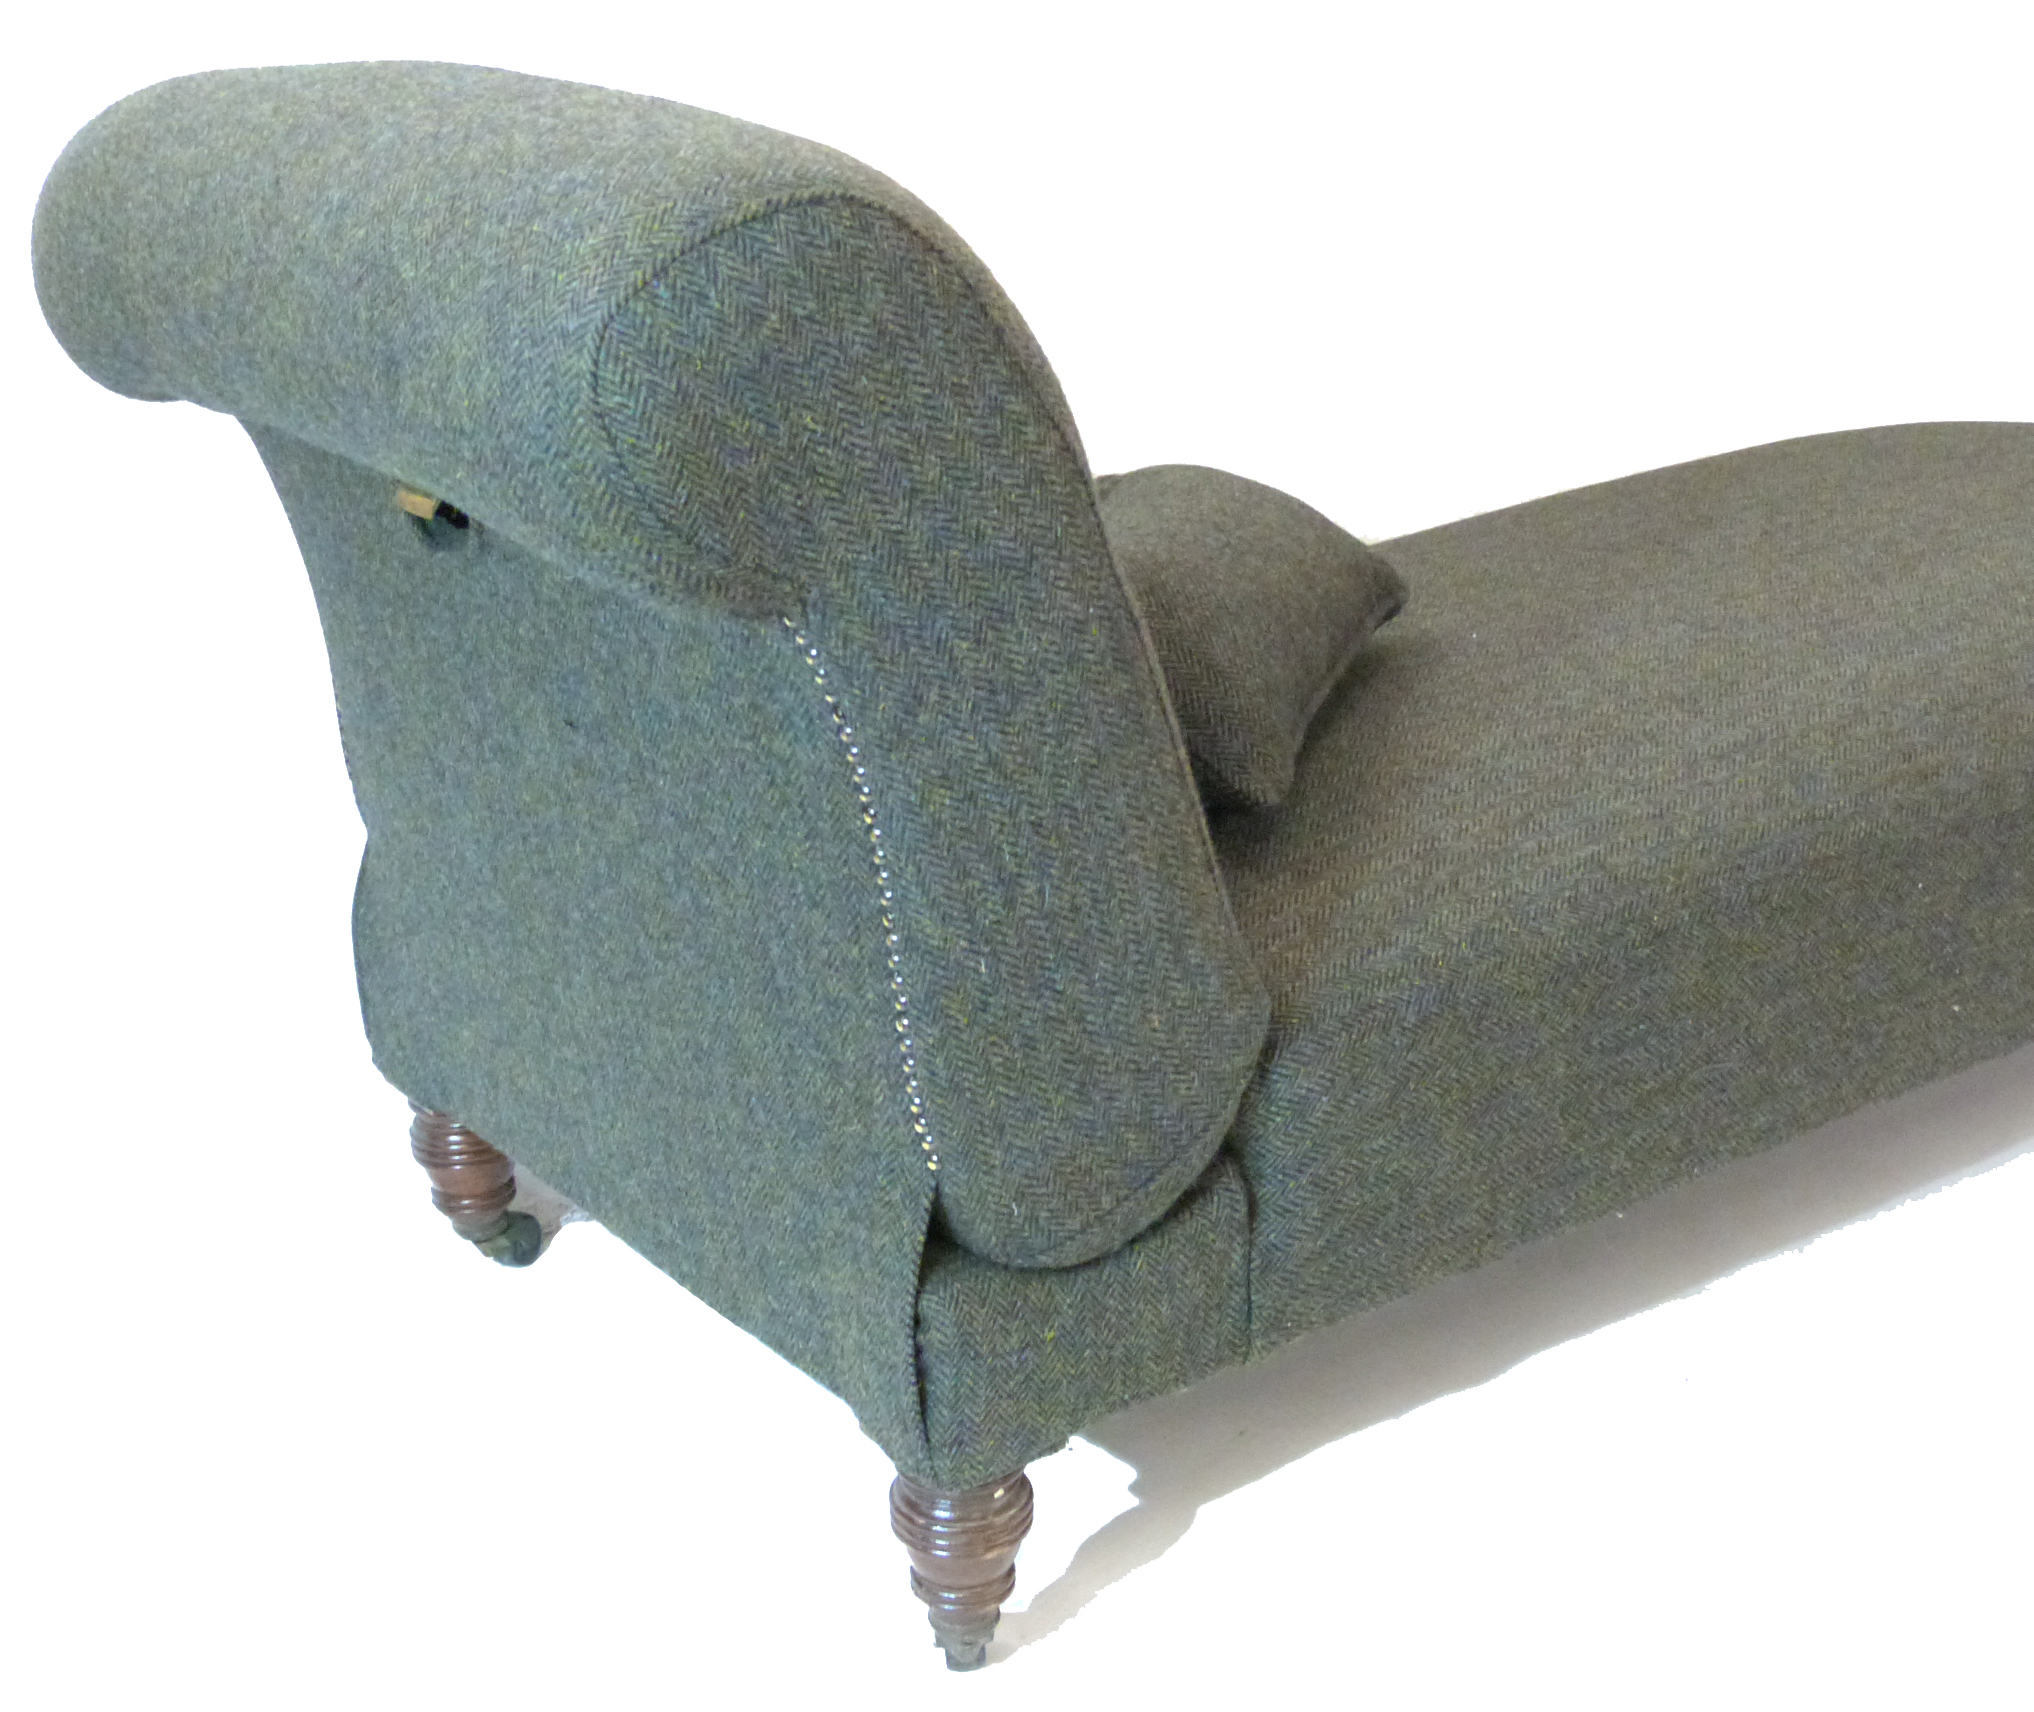 Victorian chaise longue with adjustable backrest, recently re-upholstered in dark Harris tweed - Image 6 of 6